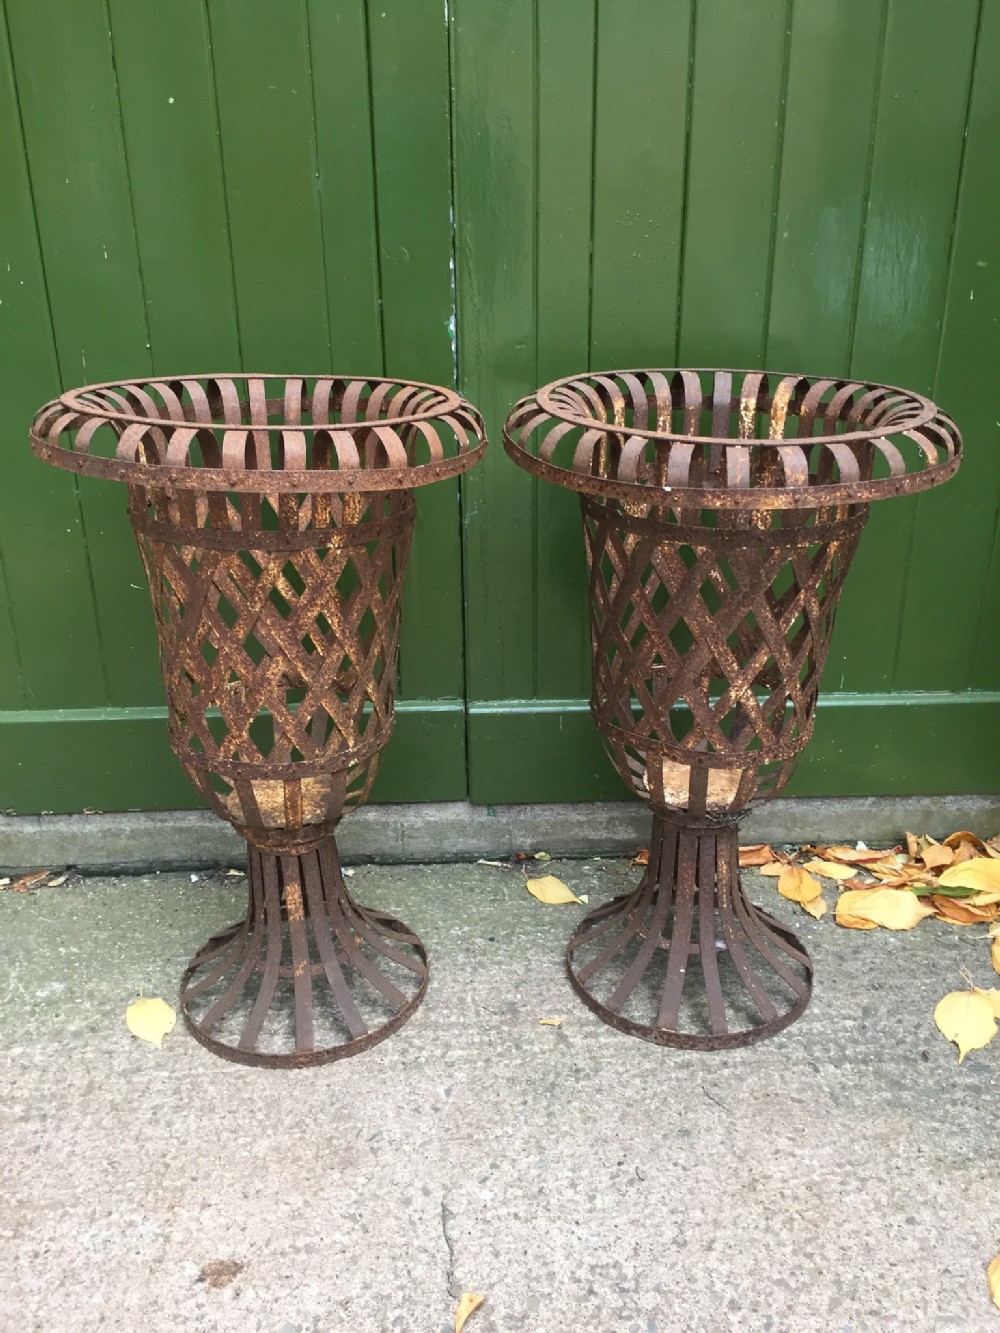 decorative pair of early c20th french strapiron open latticework garden vases of campana form